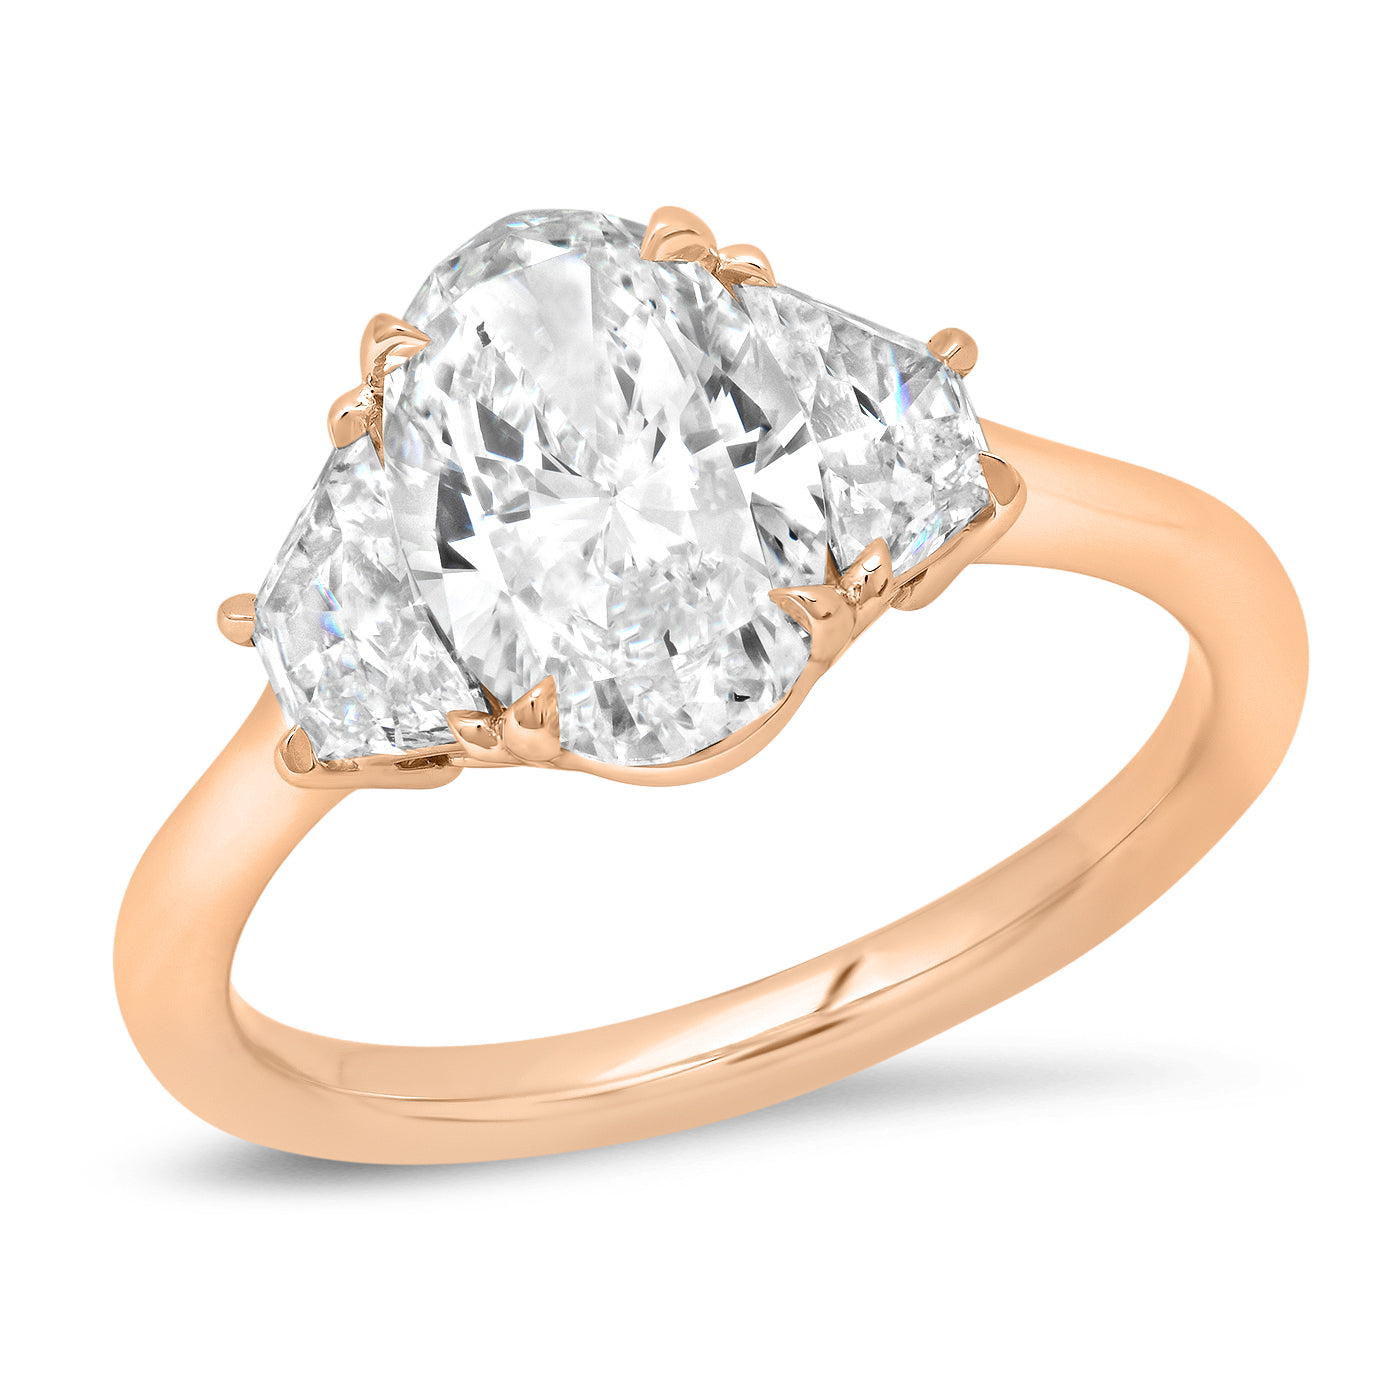 Sold - 2.01 Carat Oval Cut Engagement Ring